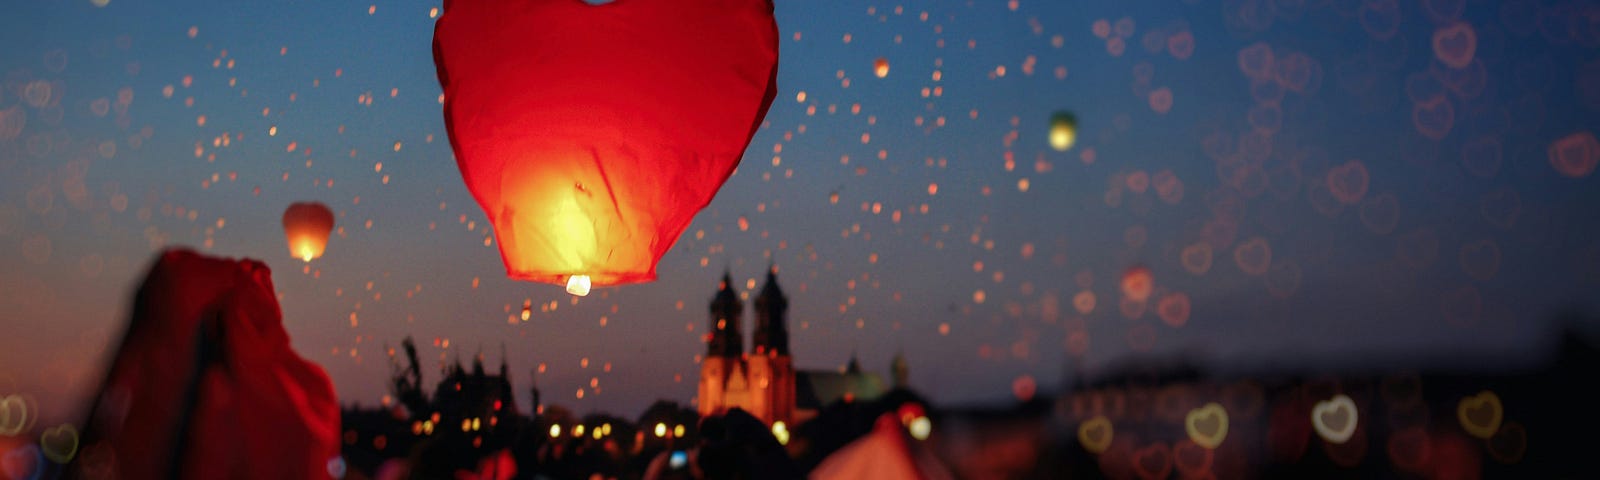 Red heart-shaped balloons being released against a dark blue night sky by a group of people, with one couple on a stage as if being honored.